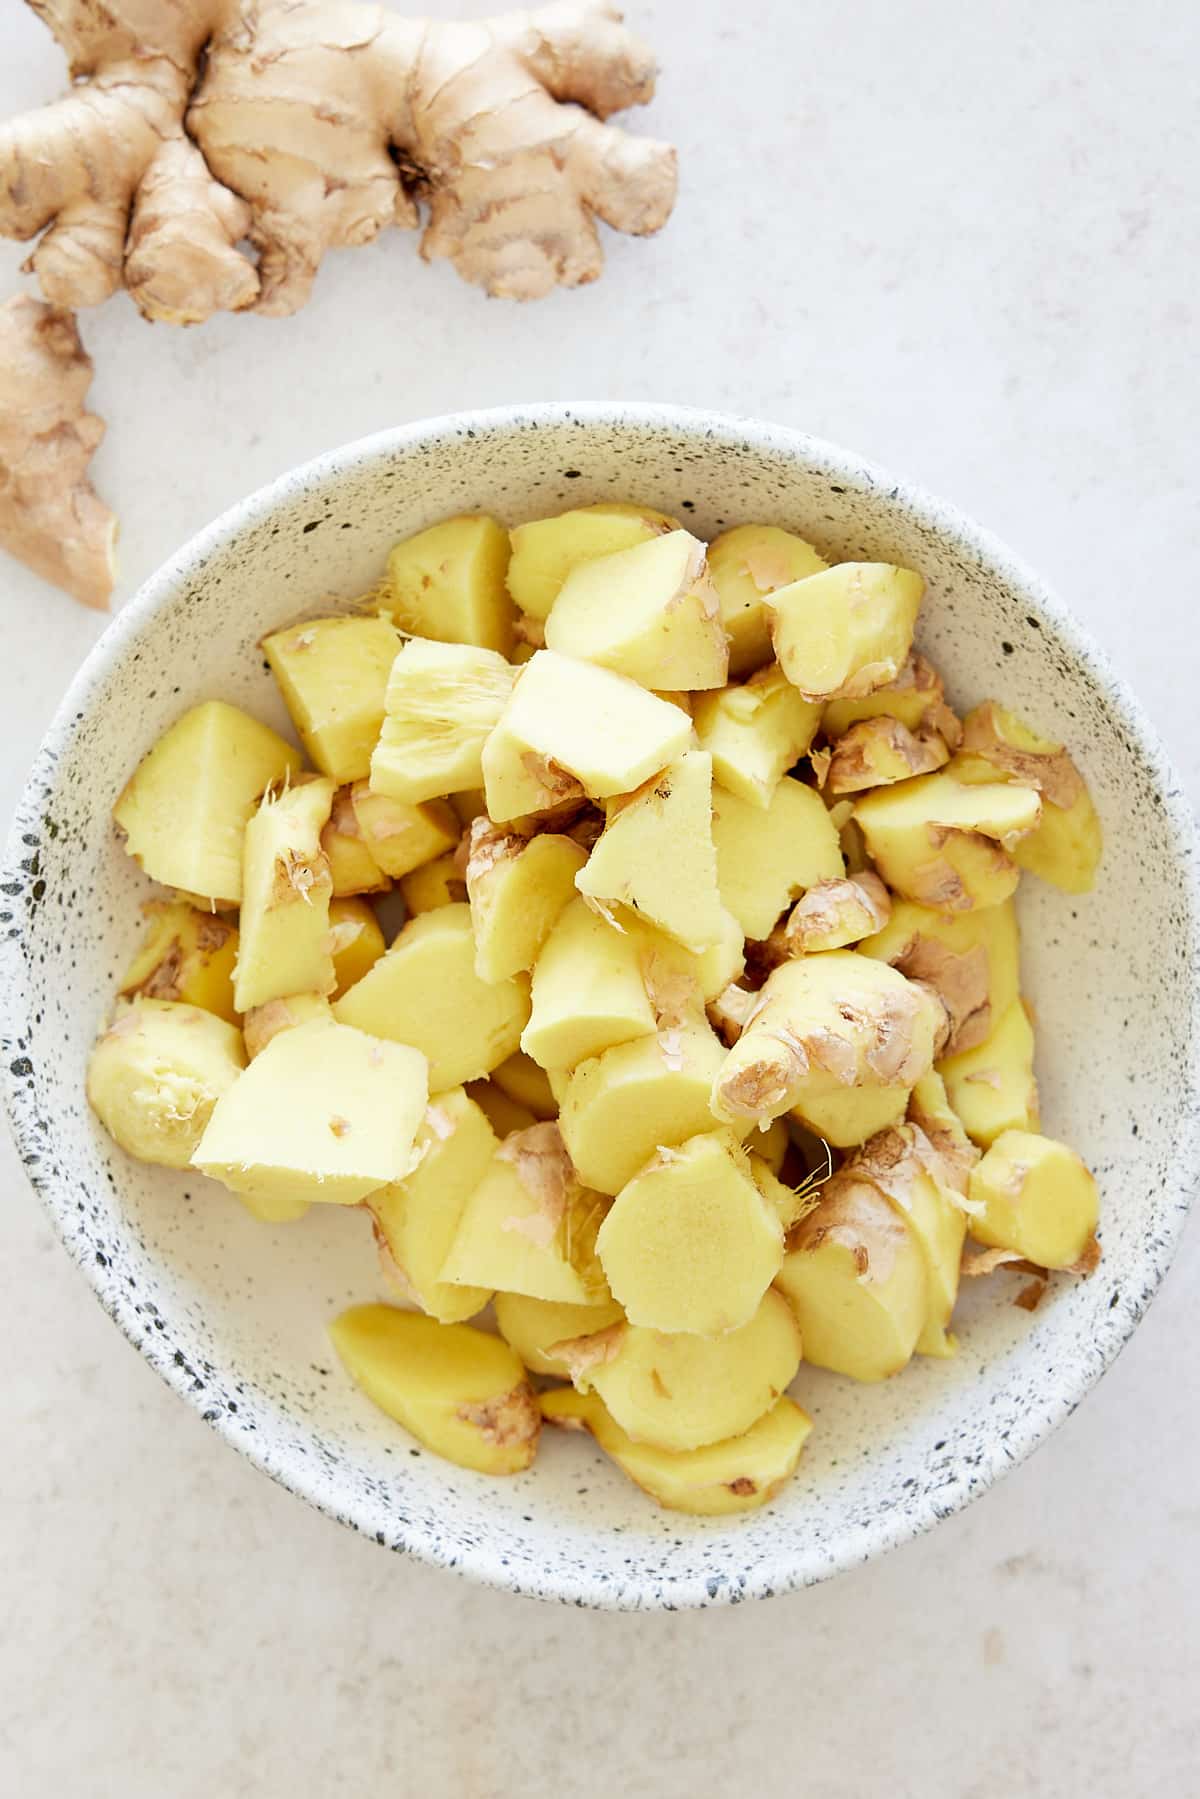 A white bowl of roughly chopped ginger root with whole root of ginger set alongside